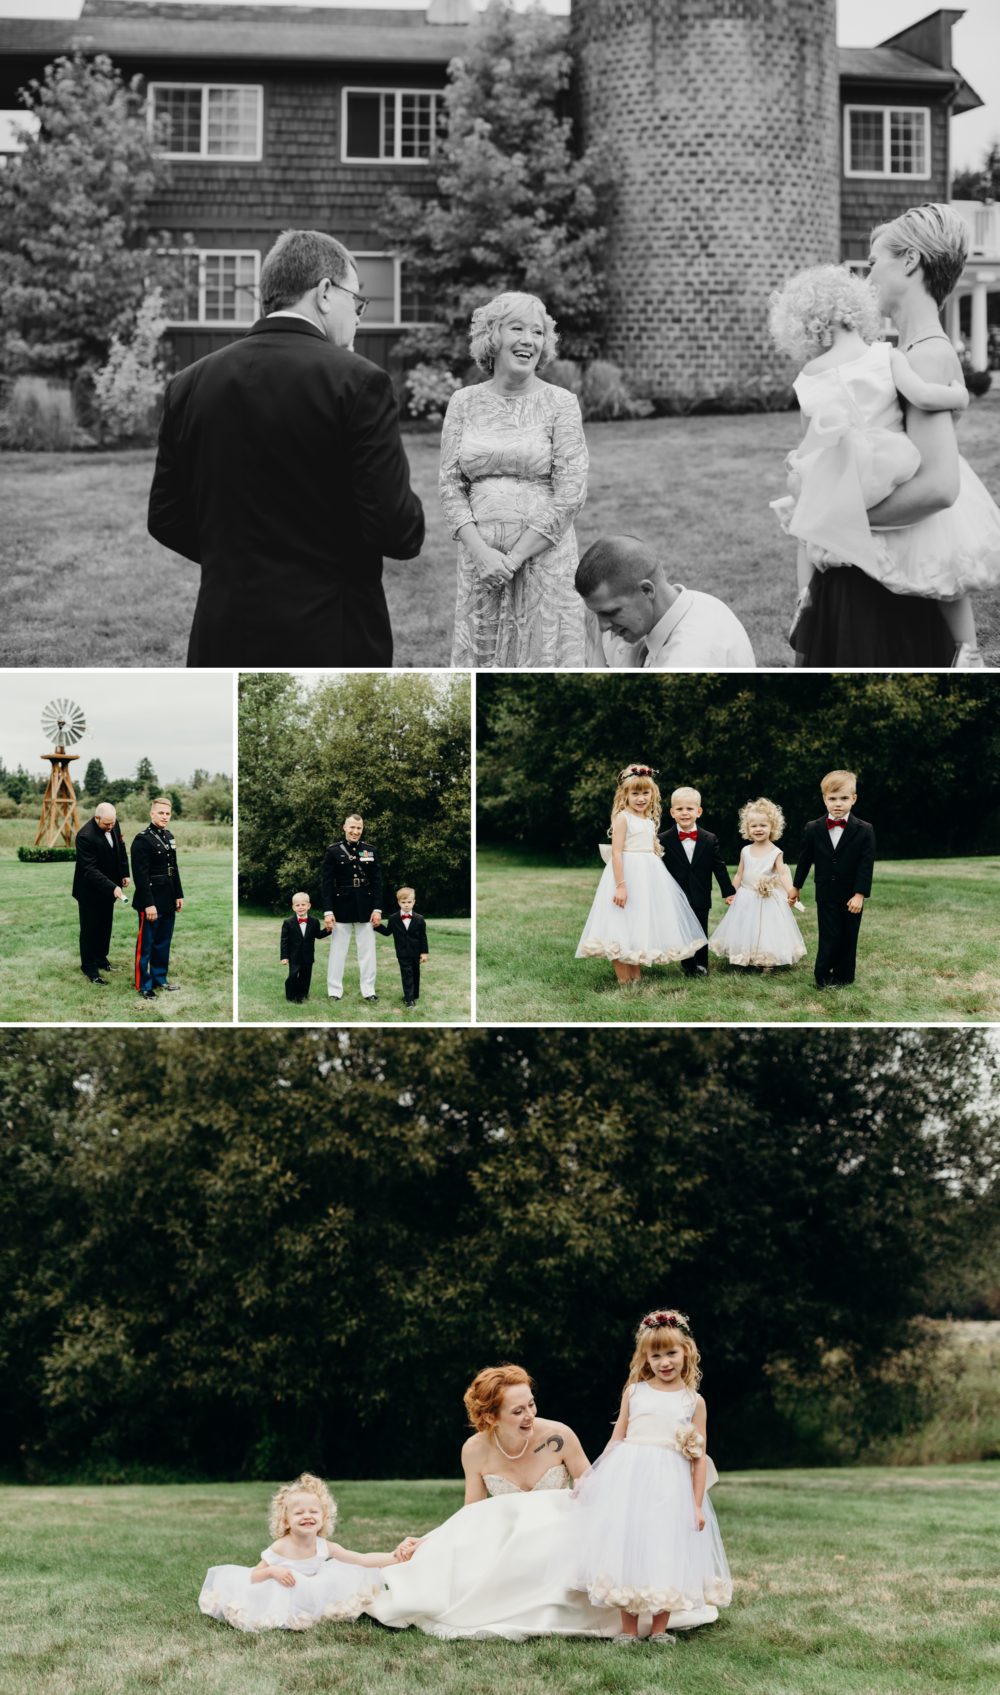 Cuties! By Seattle wedding photographer Briana Morrison